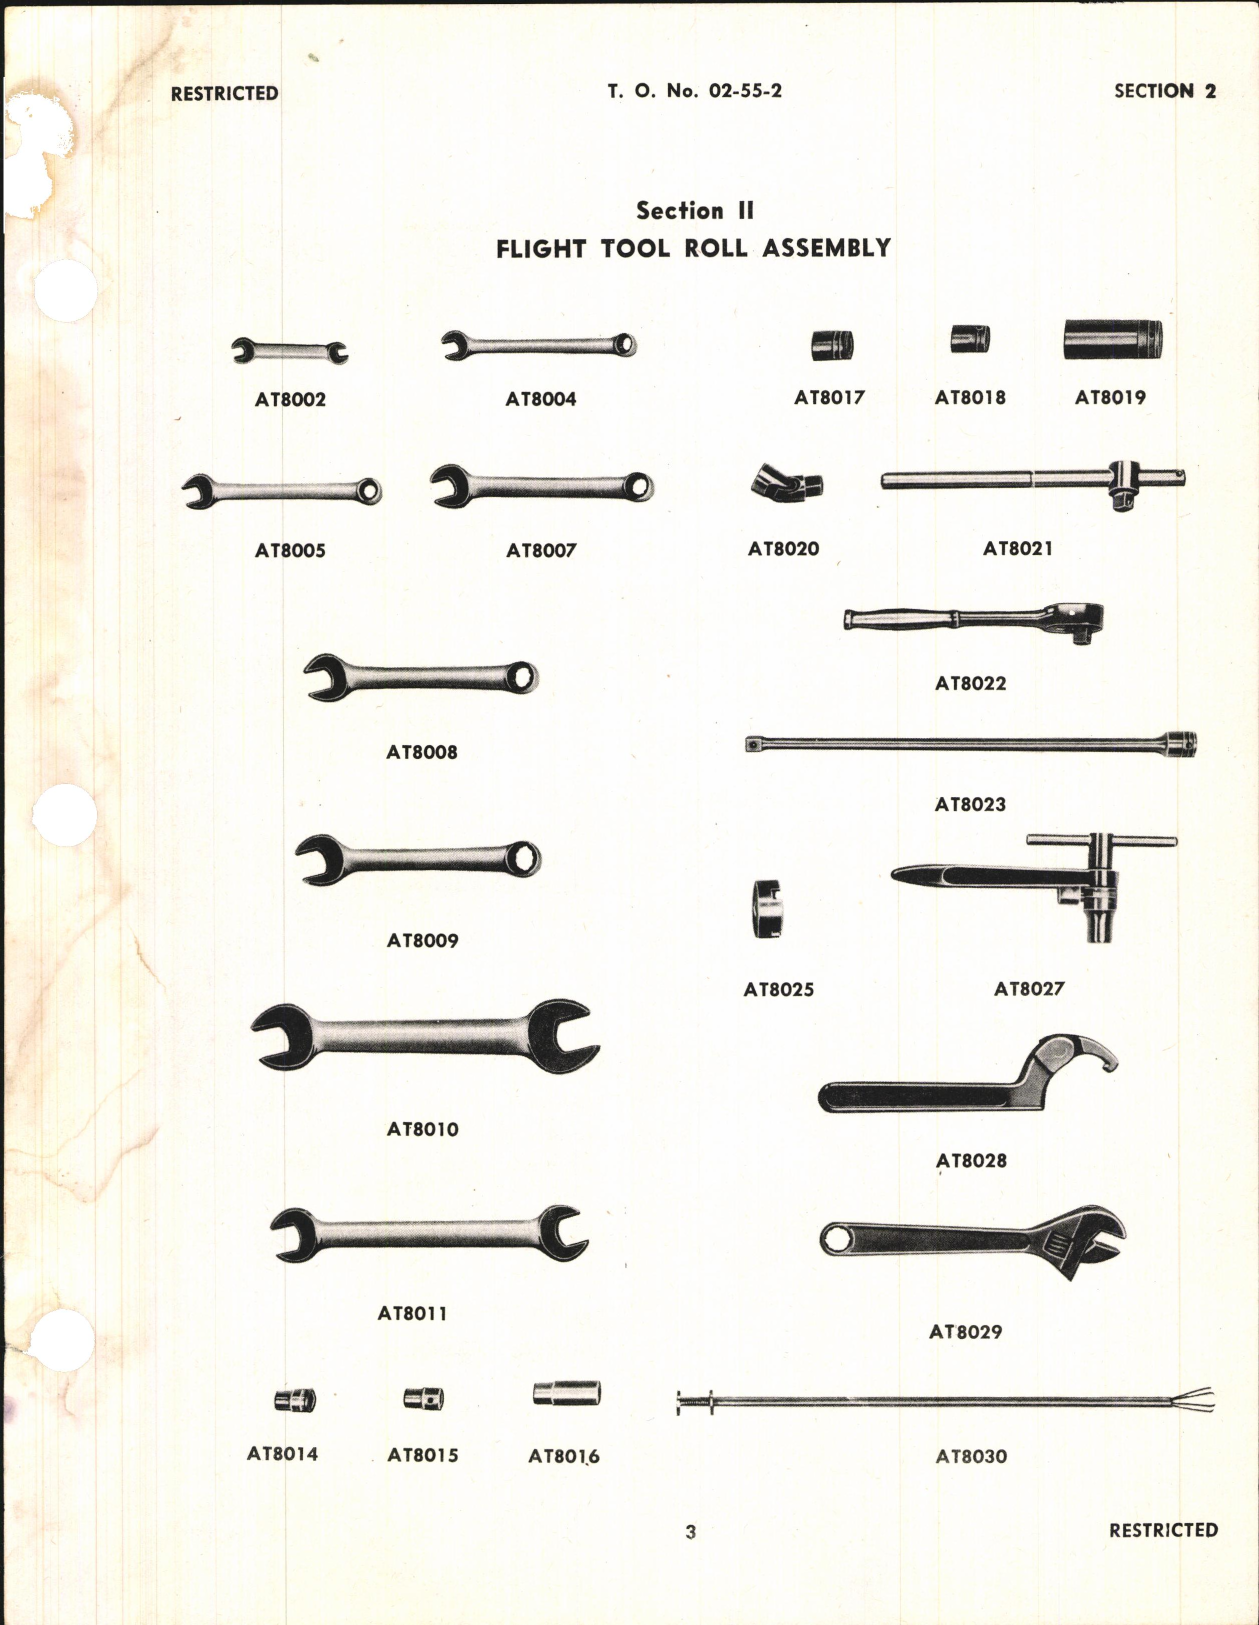 Sample page 5 from AirCorps Library document: Service Tool Catalog for Rolls-Royce Aircraft Engines